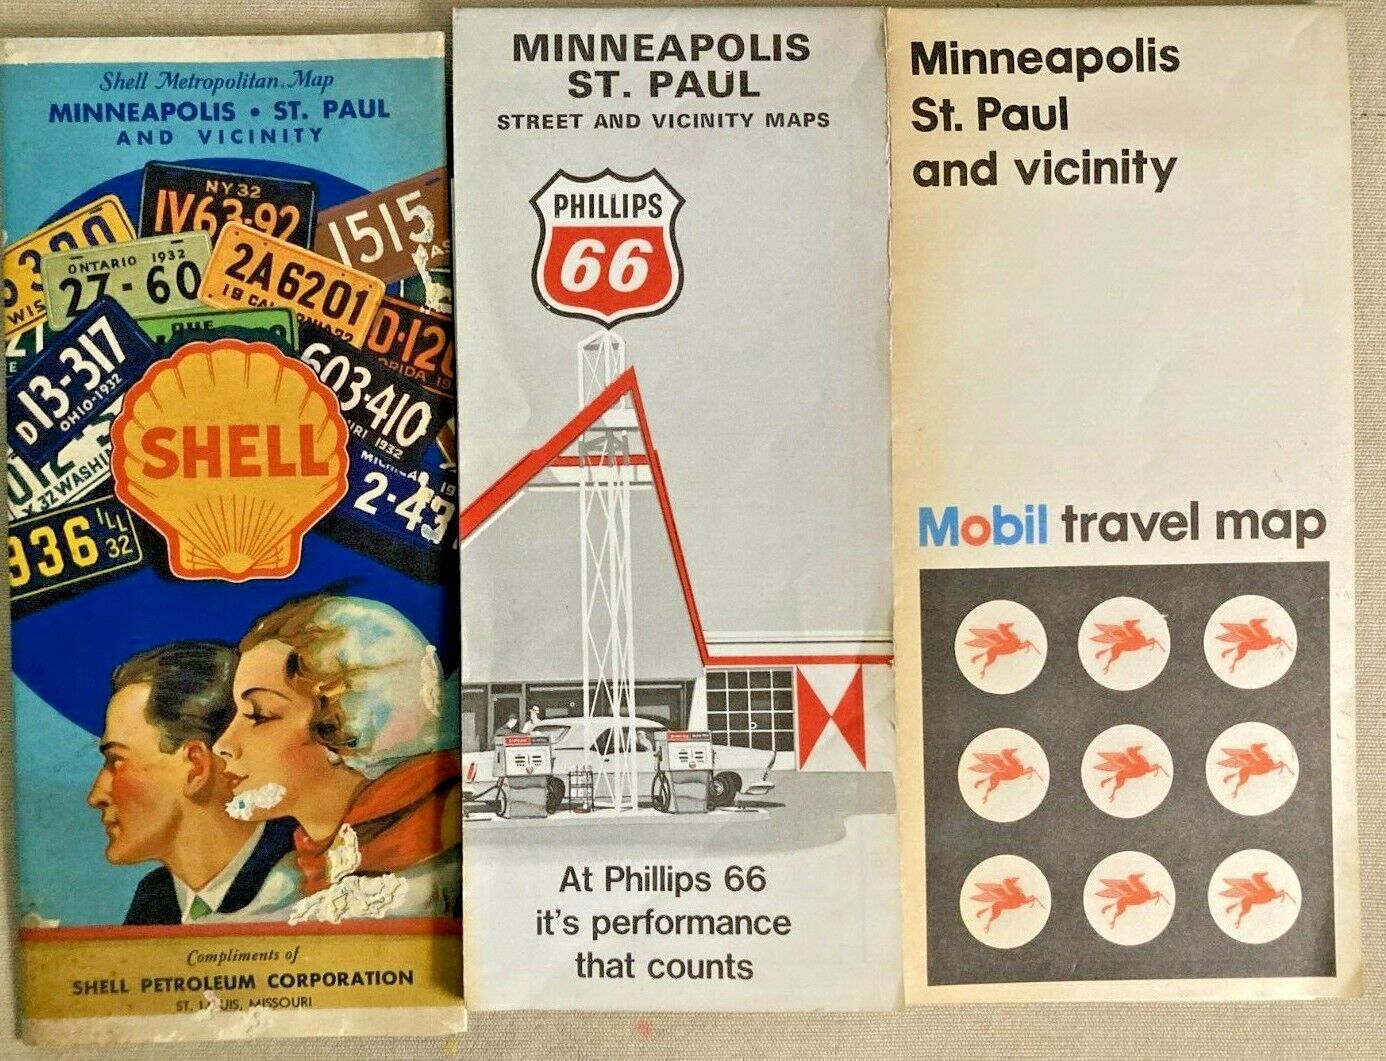 TRAVEL MAPS, MINNEAPOLIS - ST. PAUL & VICINITY, MOBLE, PHILLIPS 66, AND SHELL 19